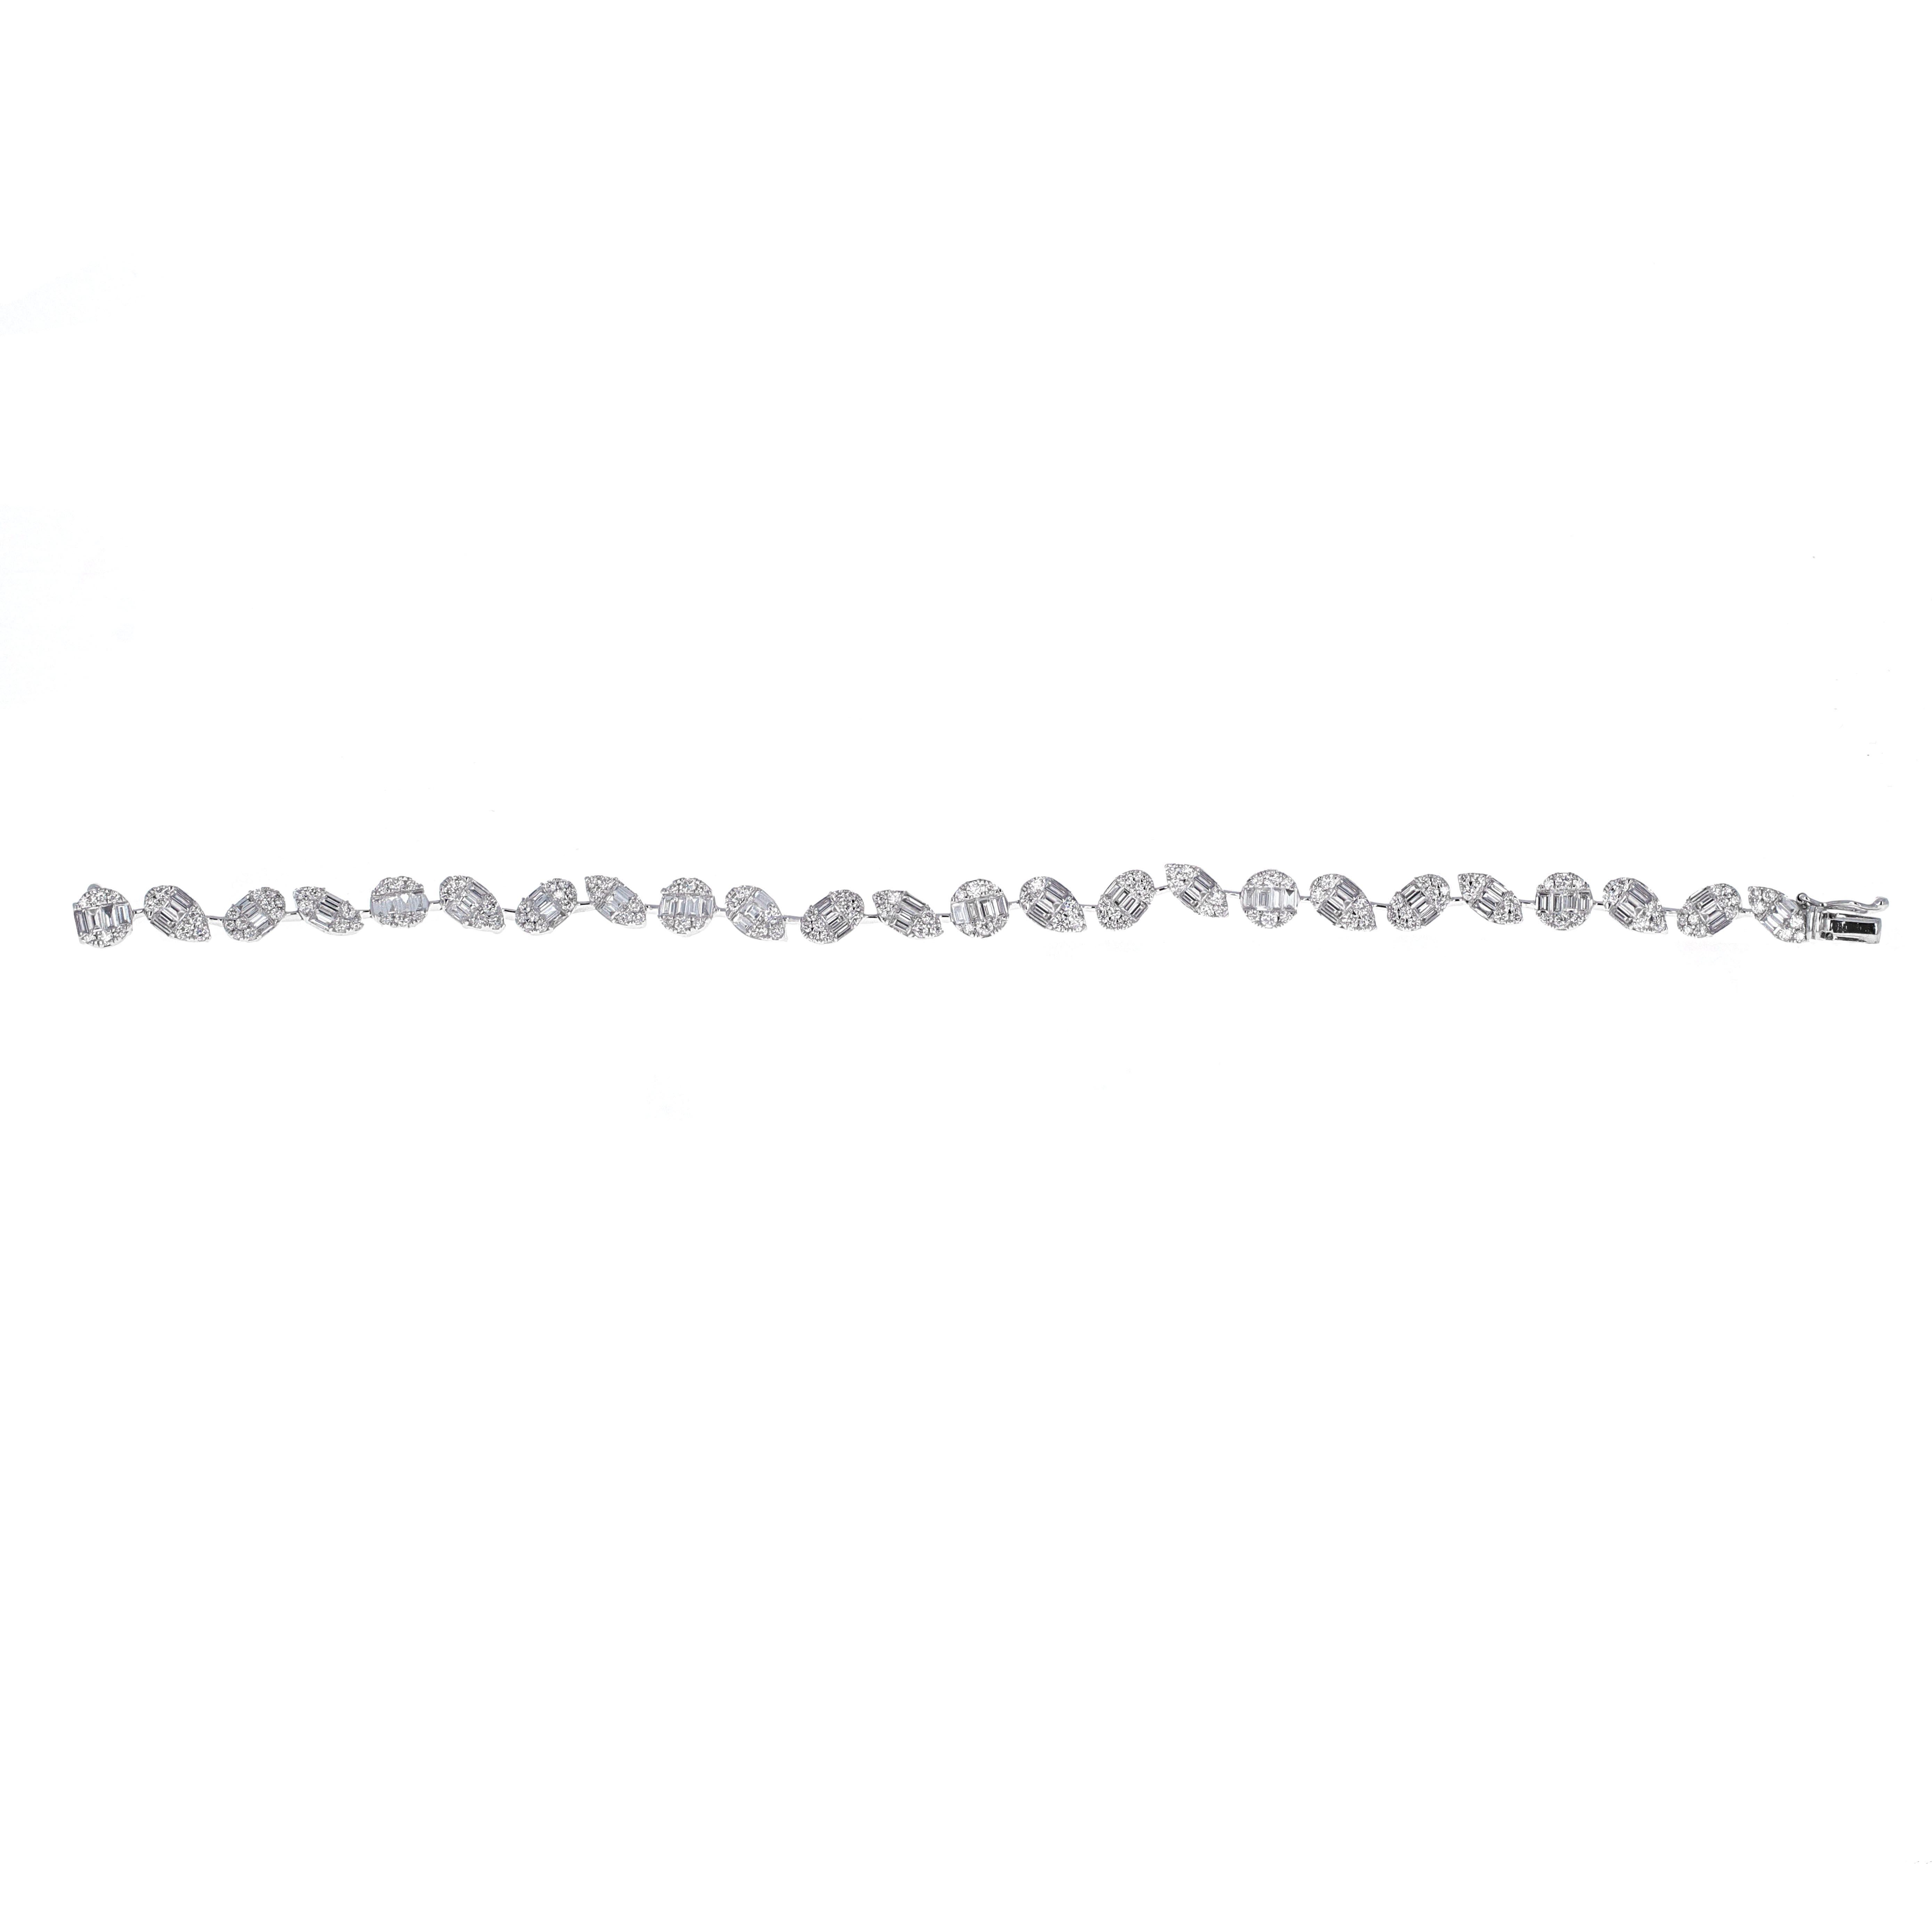 18 karat white gold illusion mixed shape diamond tennis bracelet. The bracelet is made up of smaller diamonds made to look like a larger stone. The diamond shapes are round, pear, oval and marquise shape. Each shape is made up of multiple round